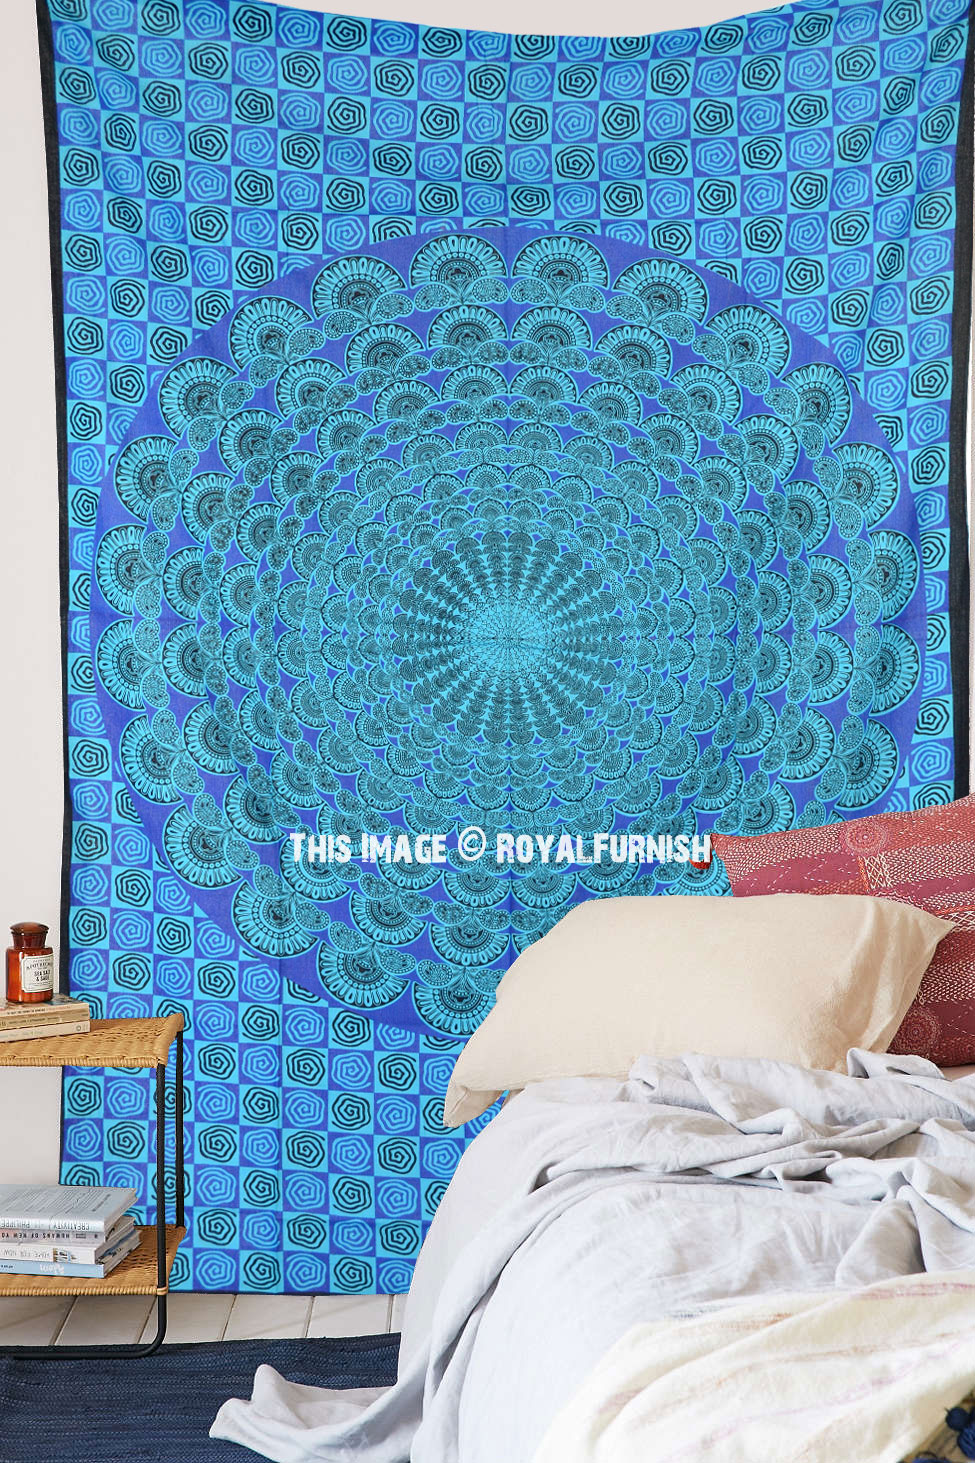 Black & White Bed Cover Peacock Feather Mandala Hippie Tapestry Decor Throw Boho